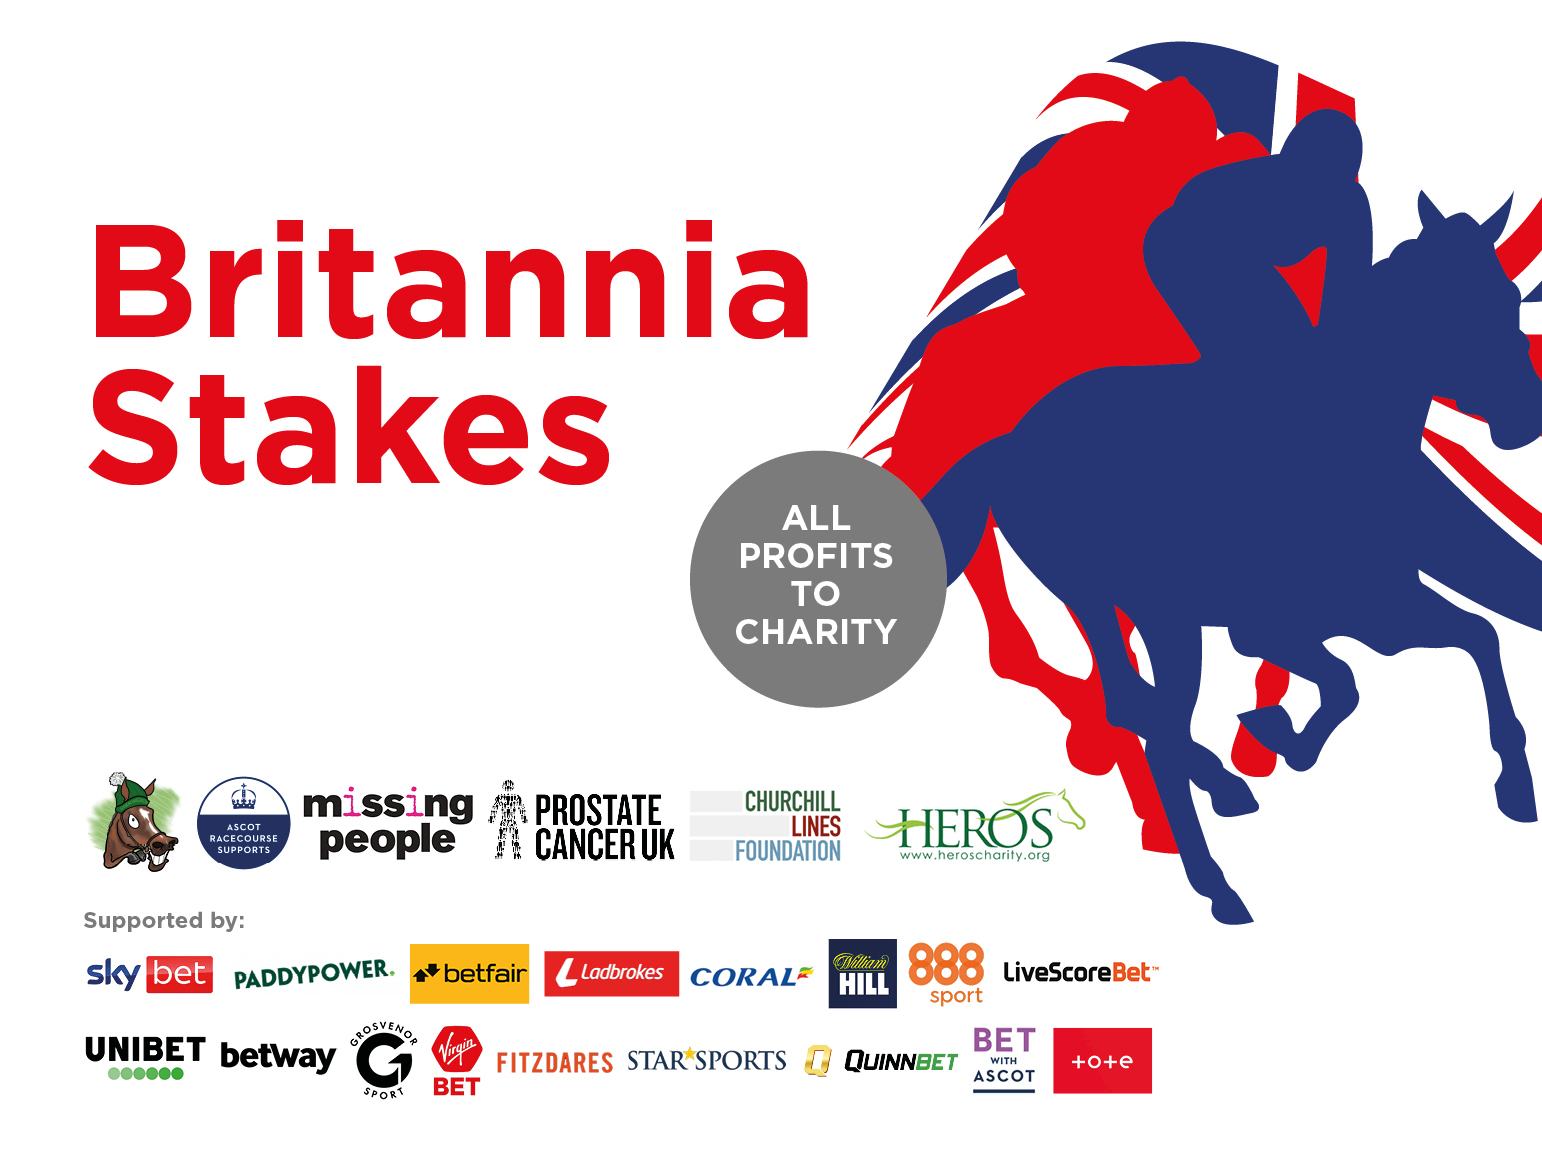 Britannia Stakes logo and the logos of charities benefitting from the initiative